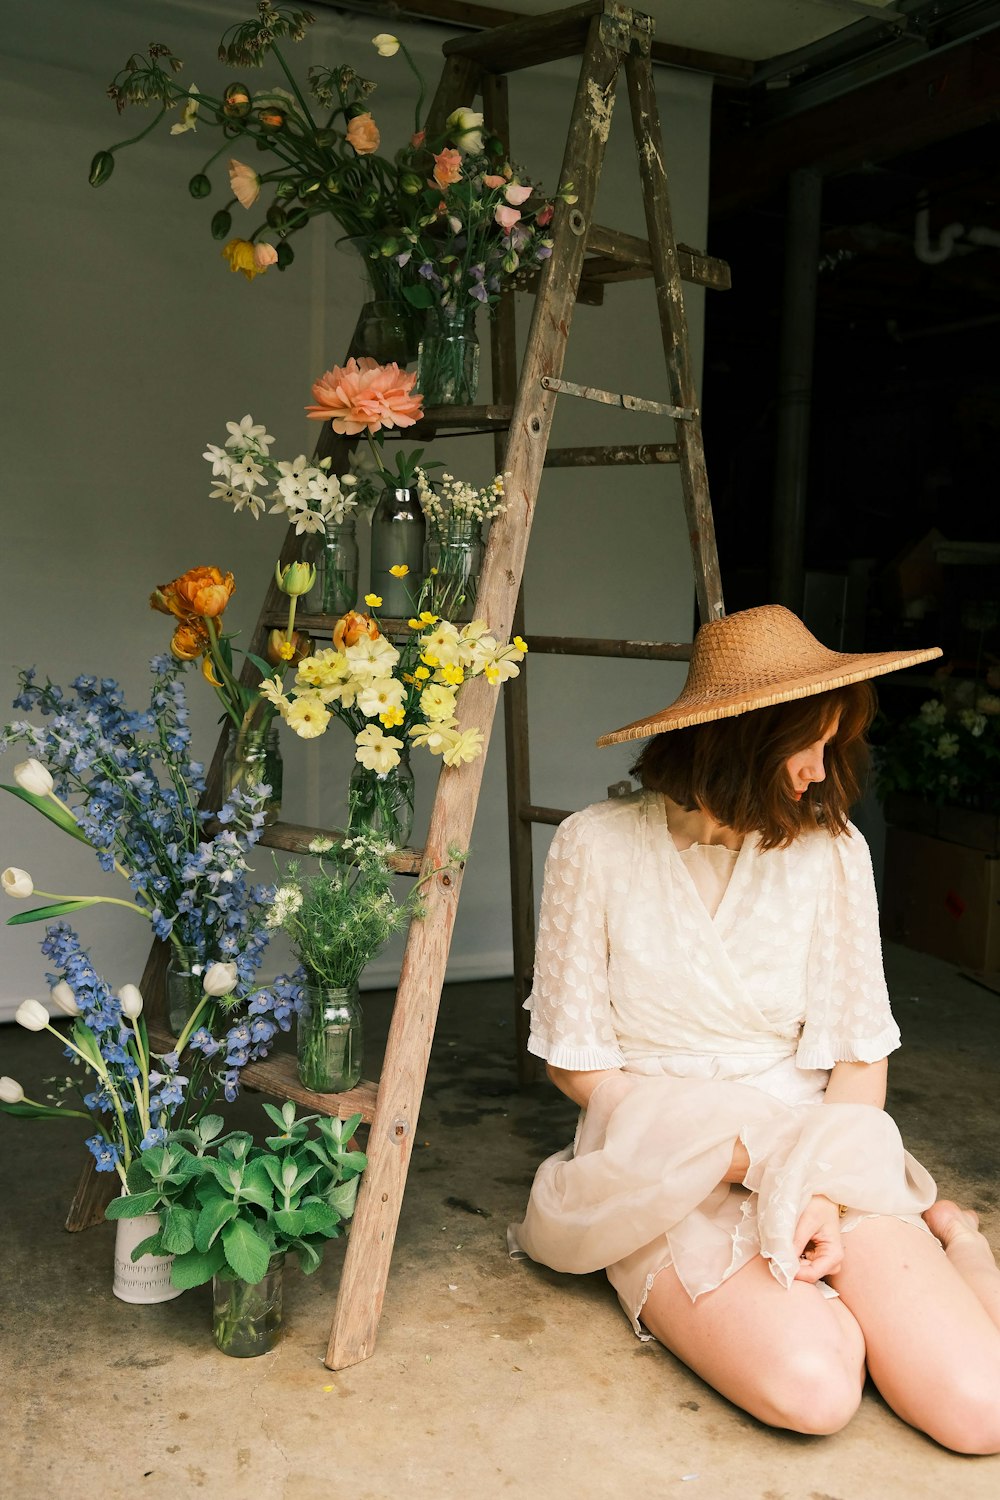 a girl sitting on the ground next to a vase of flowers